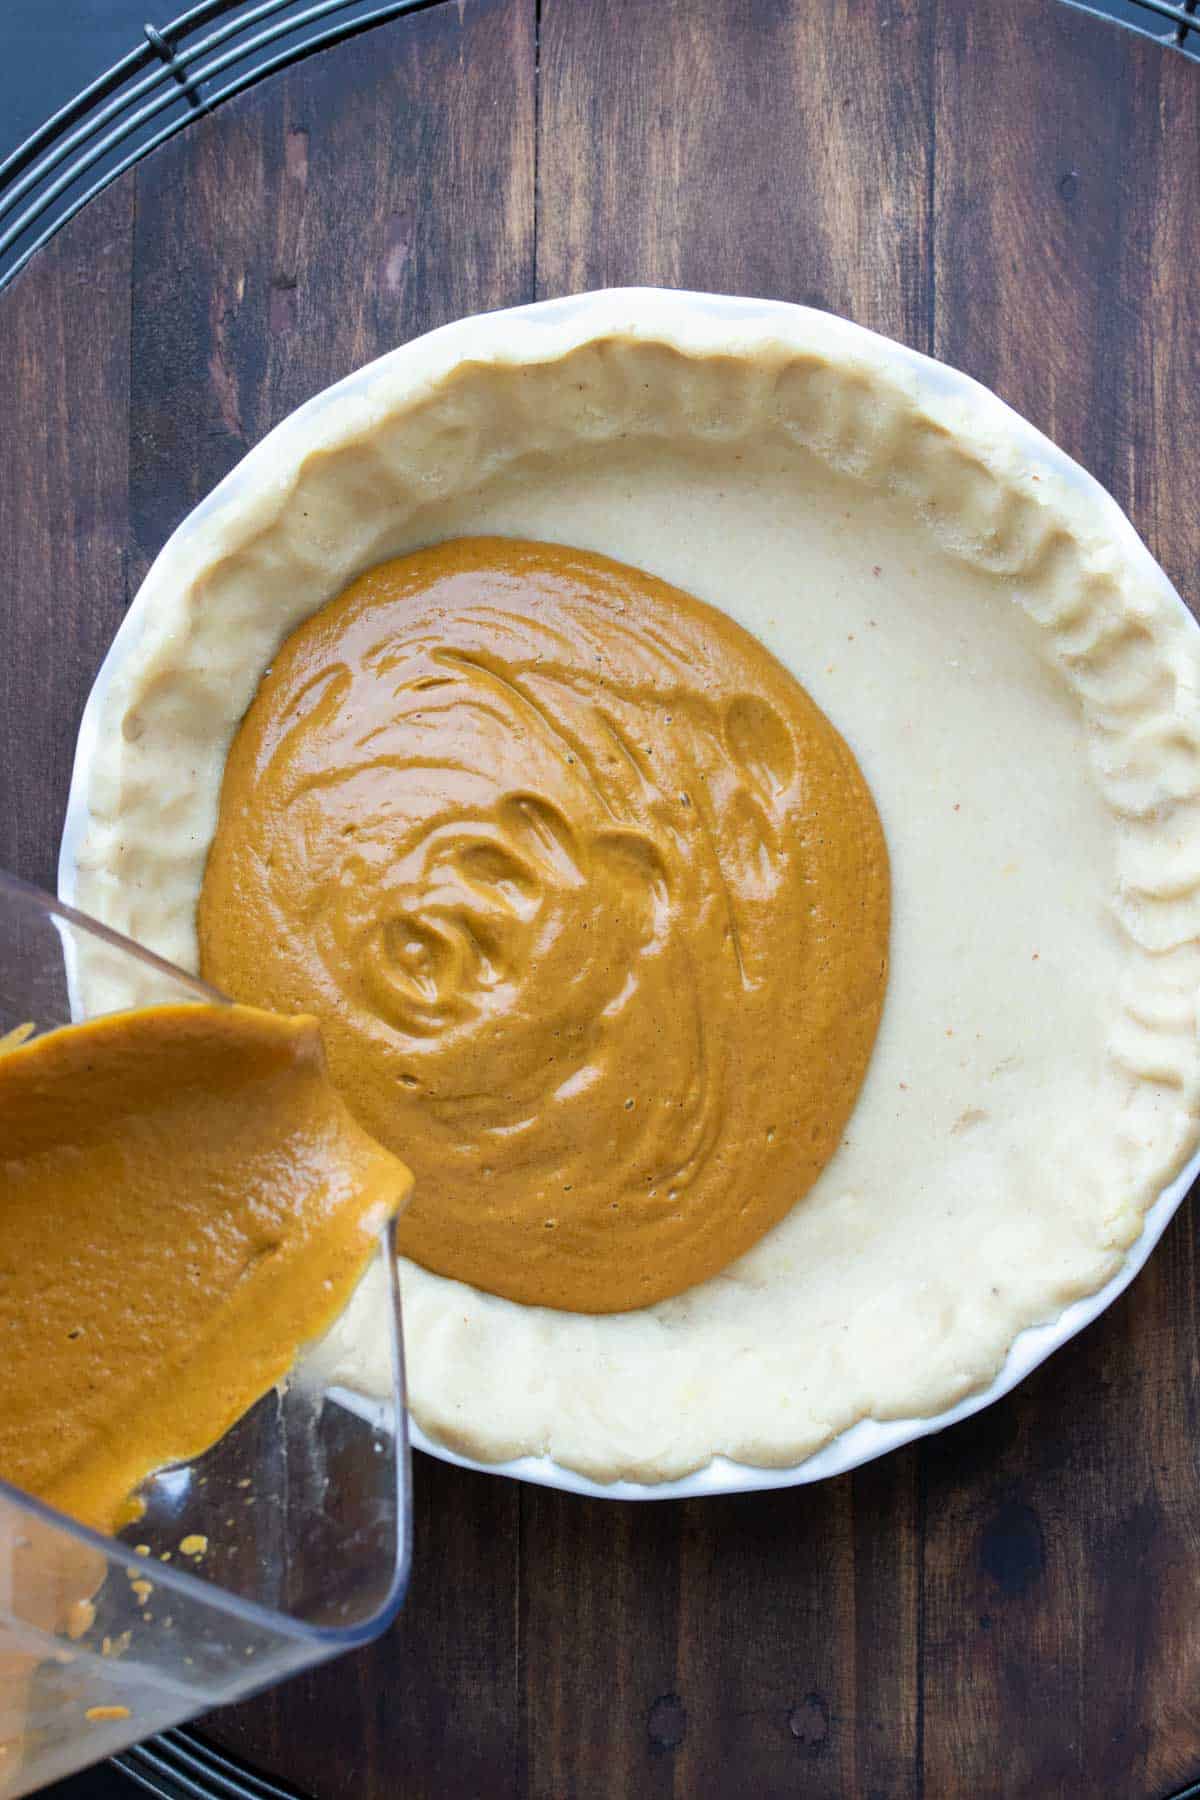 Pumpkin pie filling being poured into a pie crust.